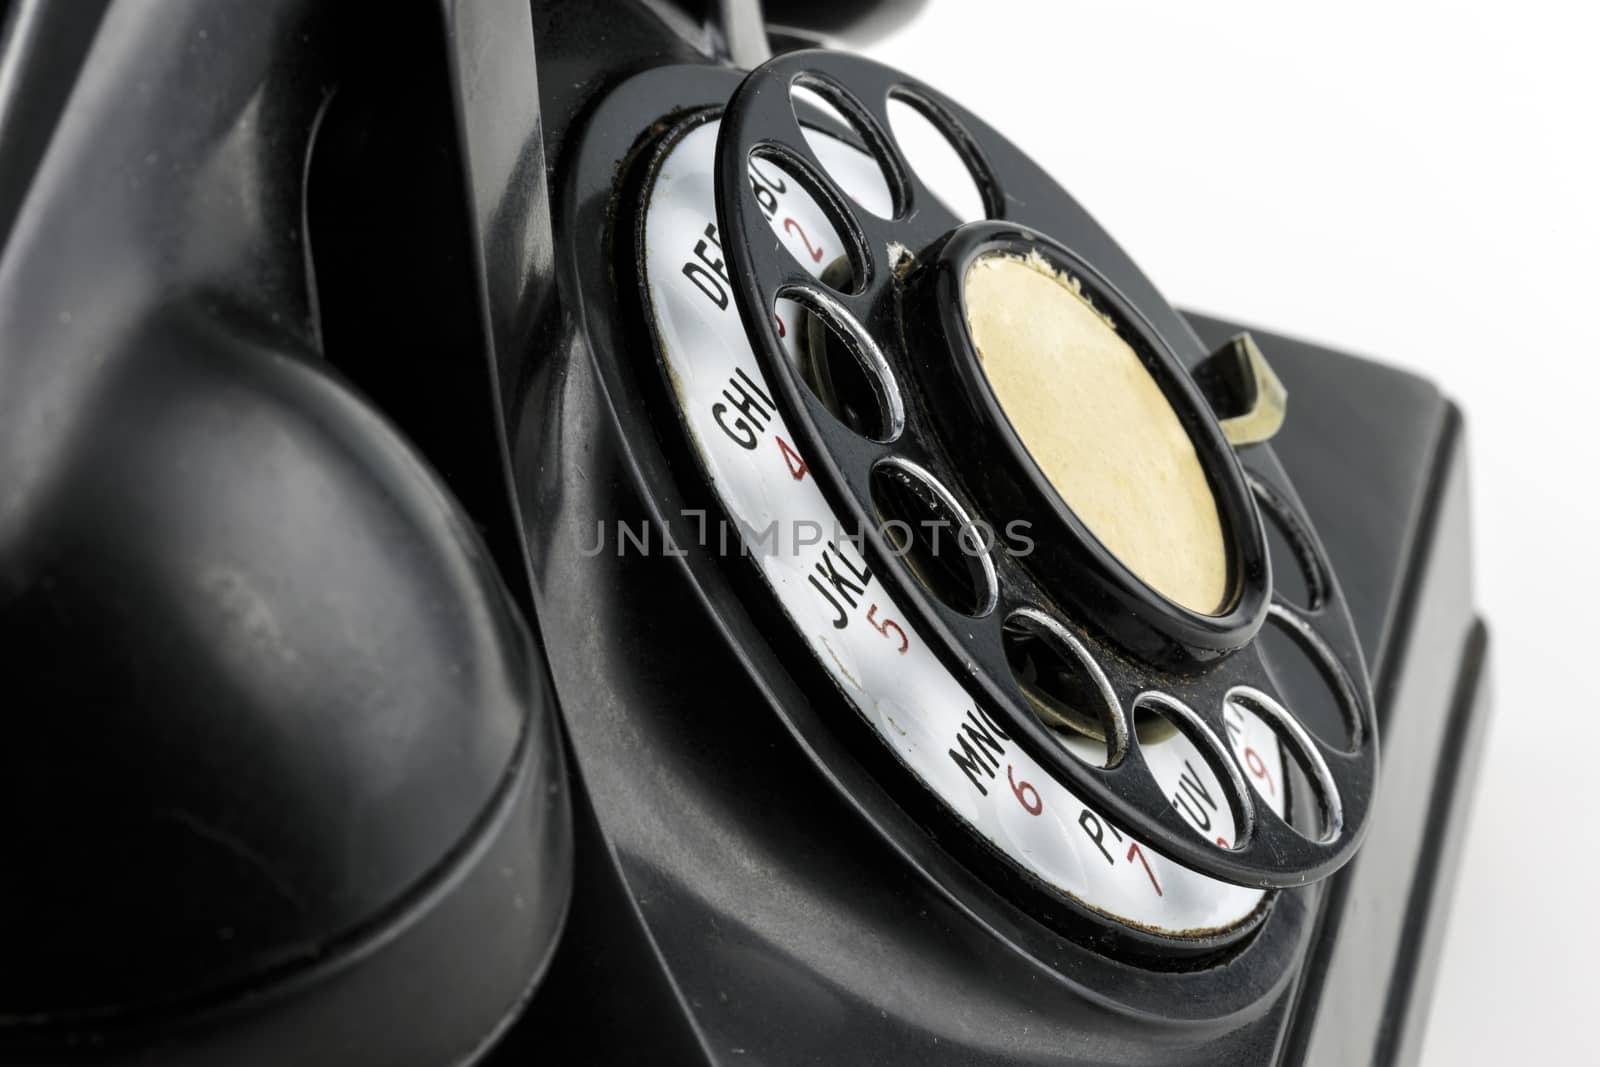 Close angled view of old fashioned rotary phone